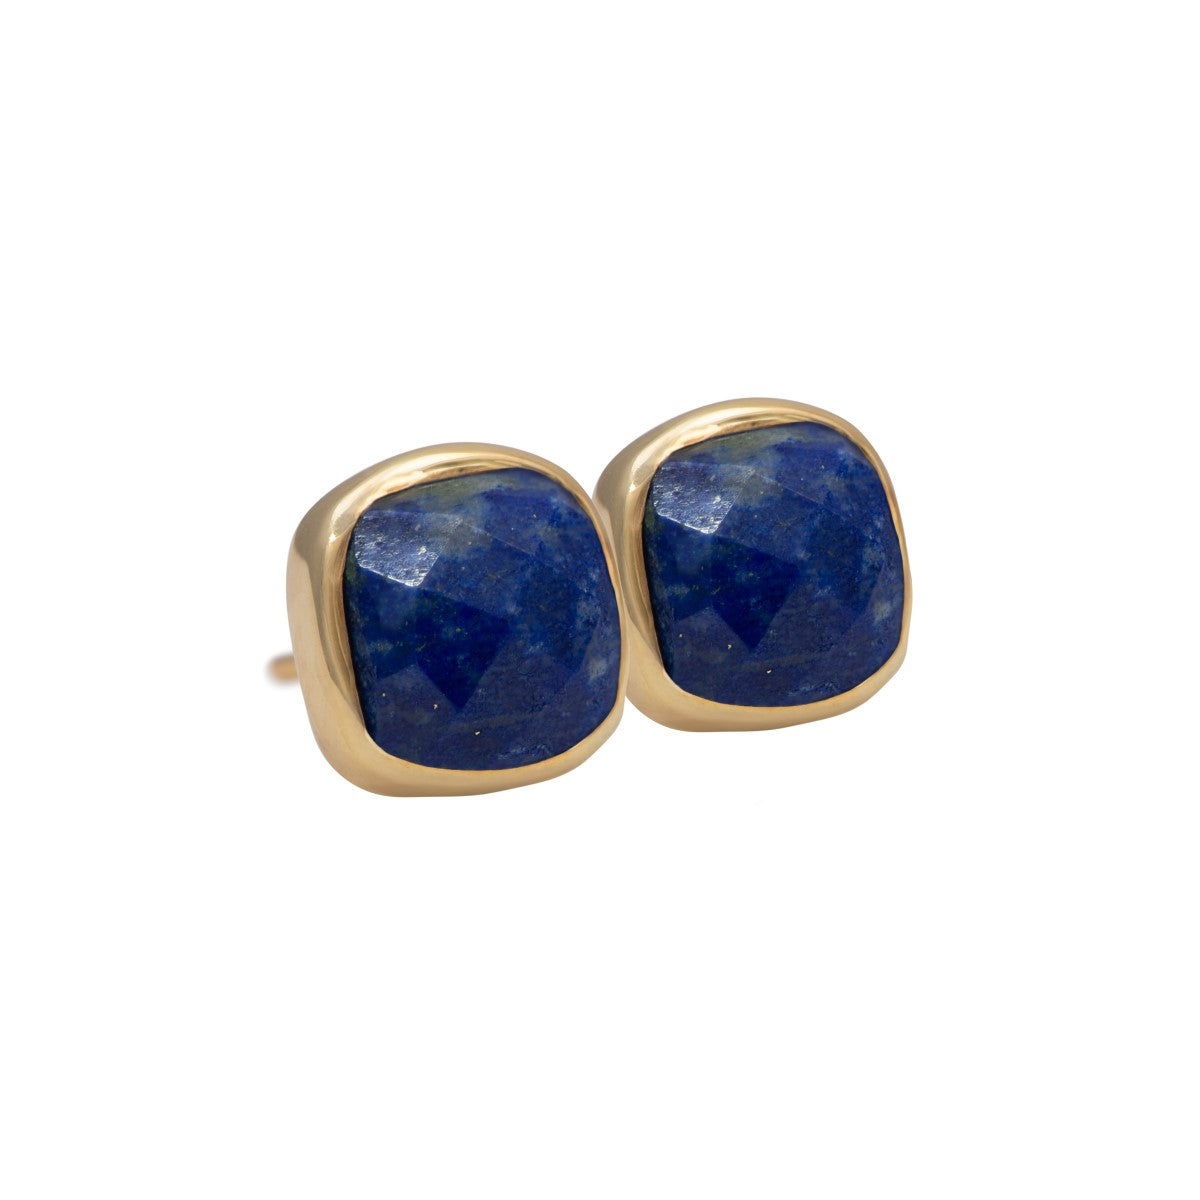 Faceted Square Lapis Lazuli Gemstone Stud Earrings in Gold Plated Sterling Silver